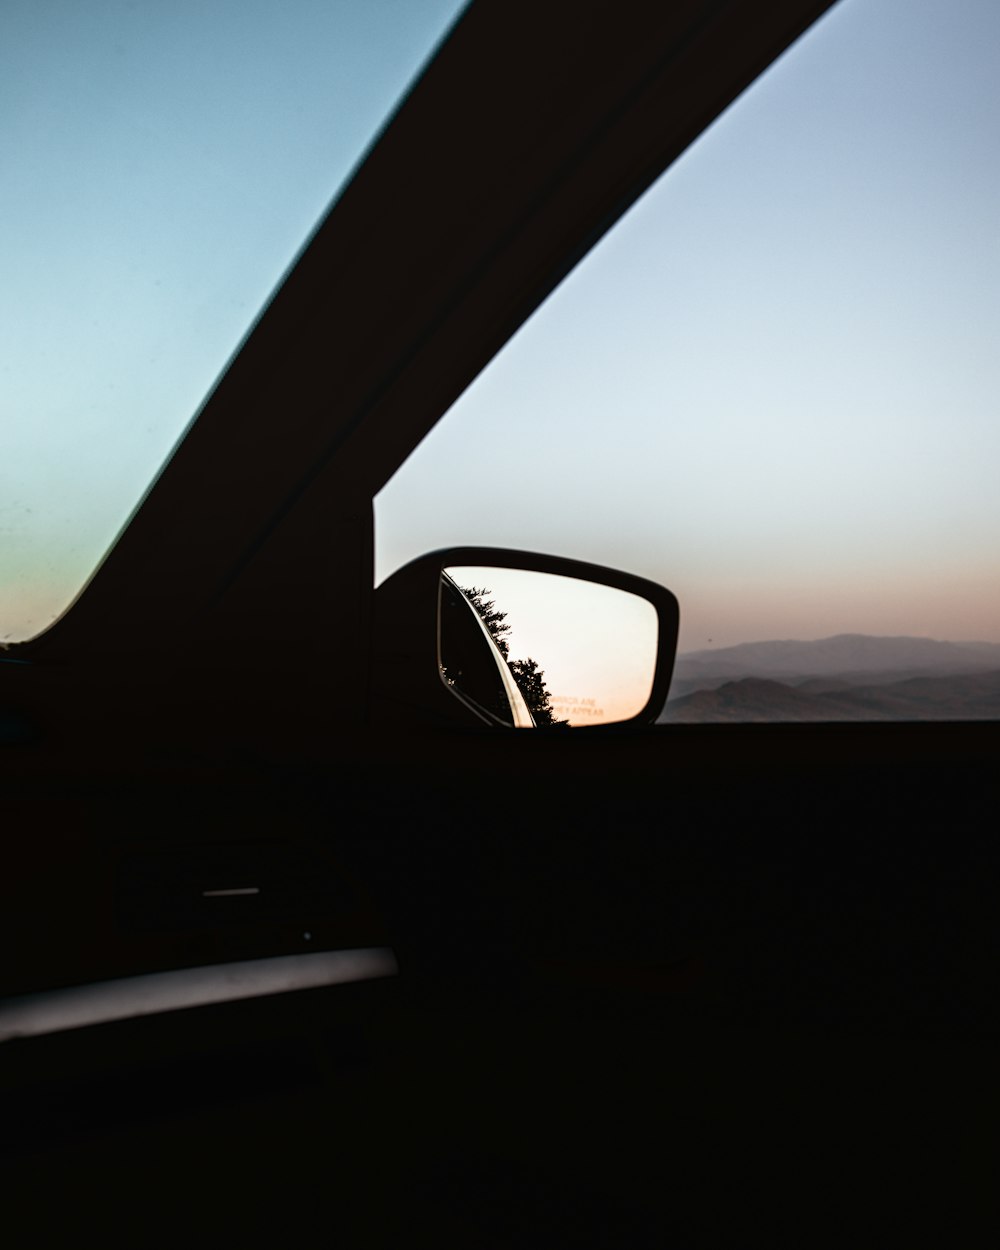 a car's side view mirror with a sunset in the background